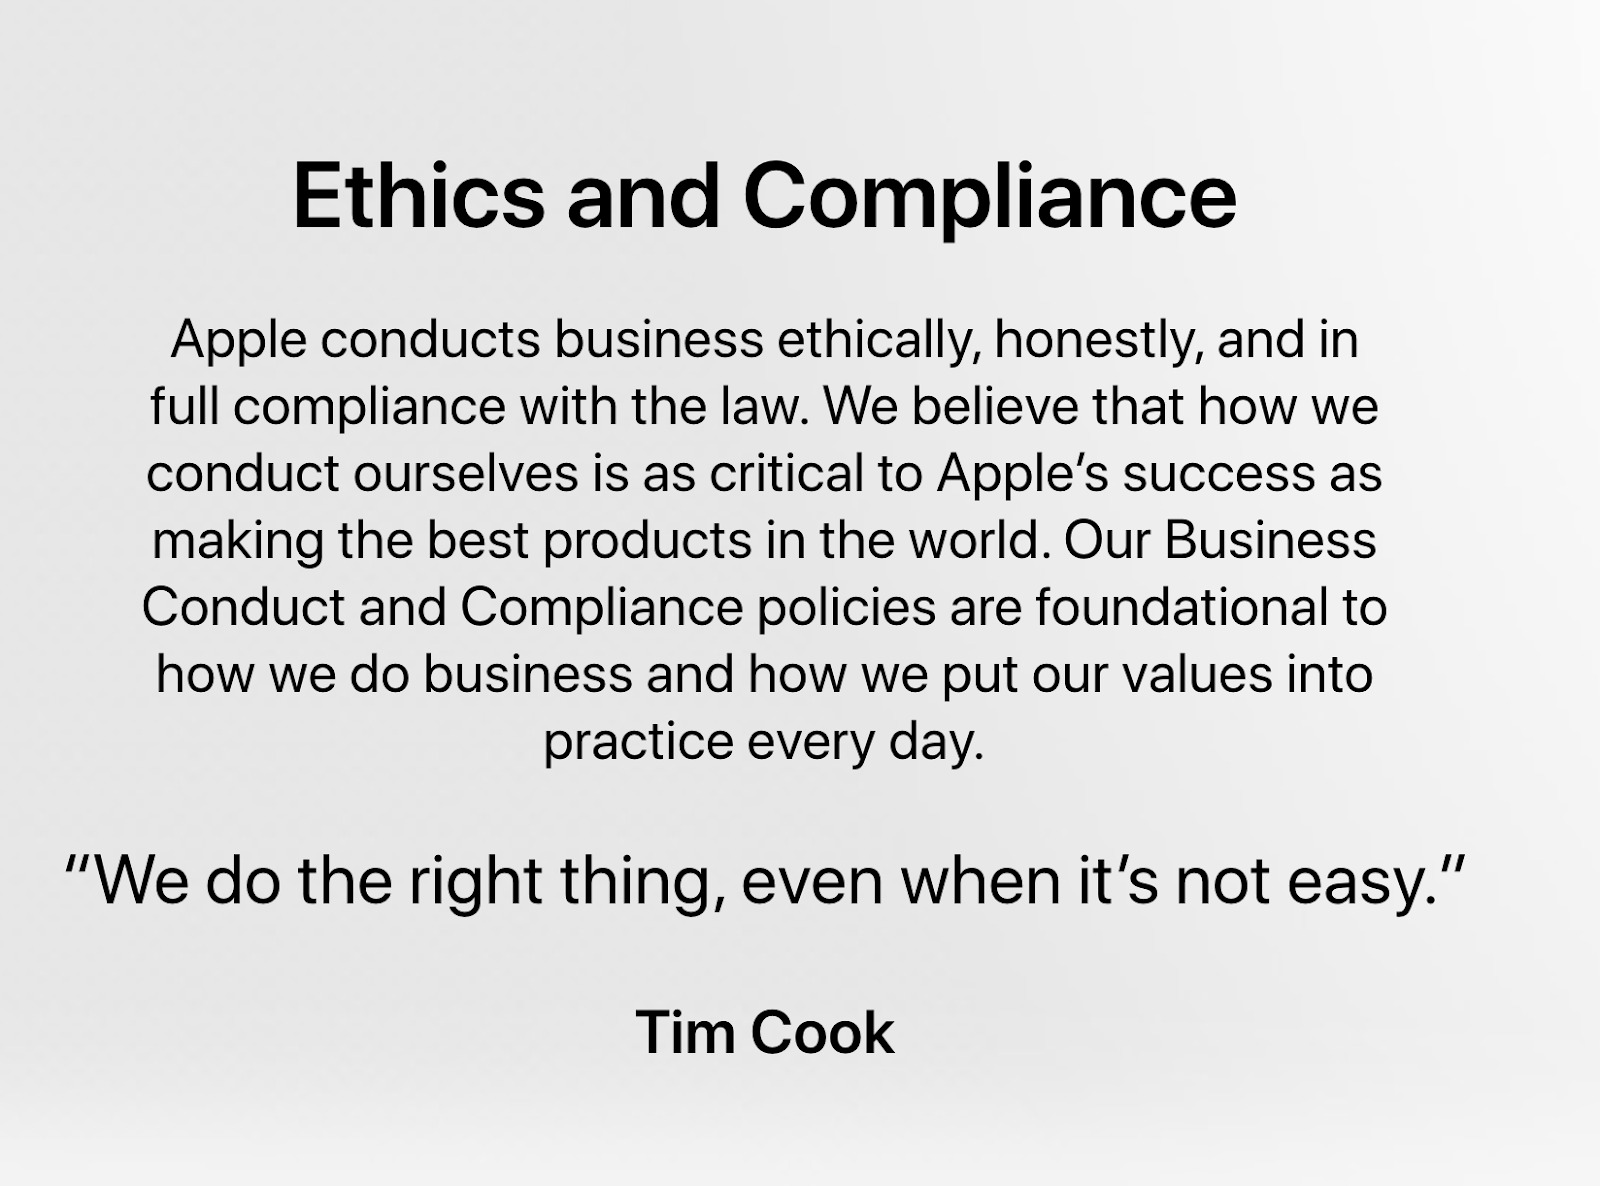 Apple's "Ethics and Compliance" statement